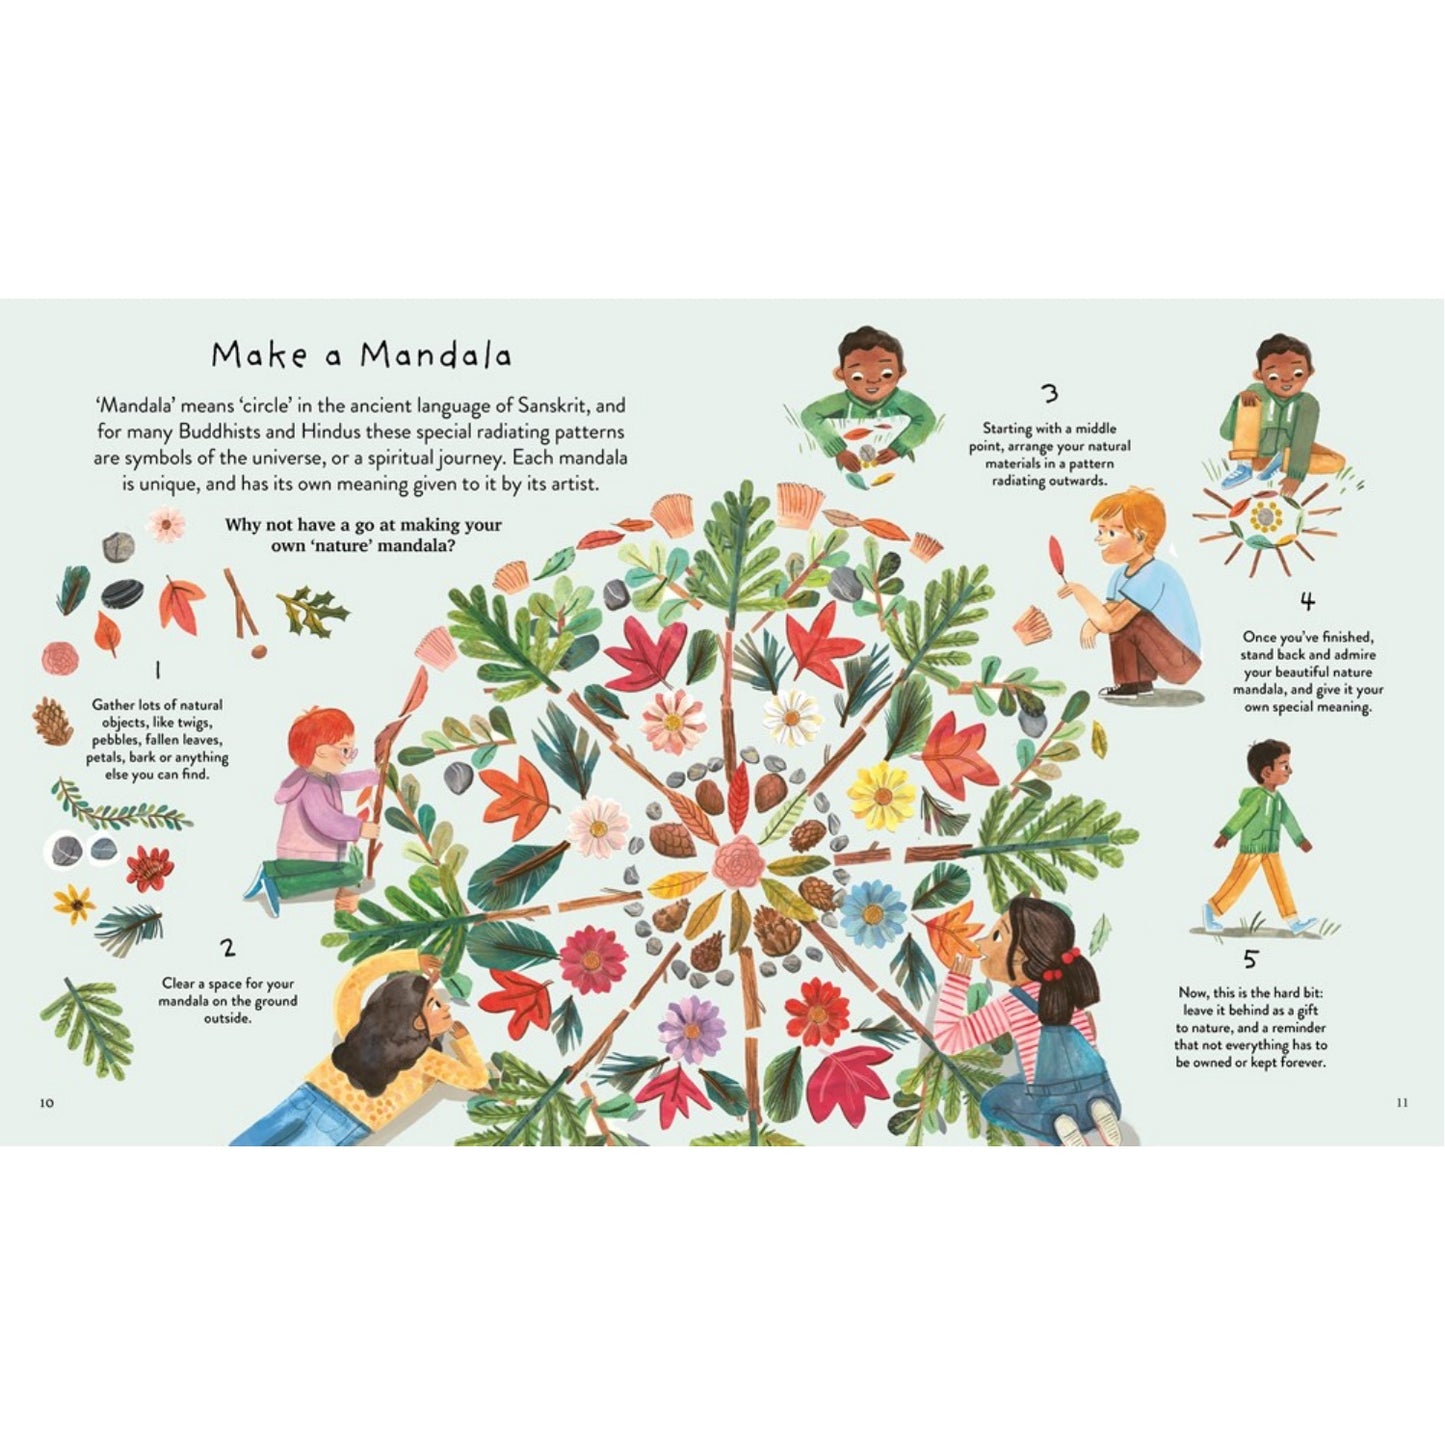 A Little Dose of Nature | Children’s Book on Nature